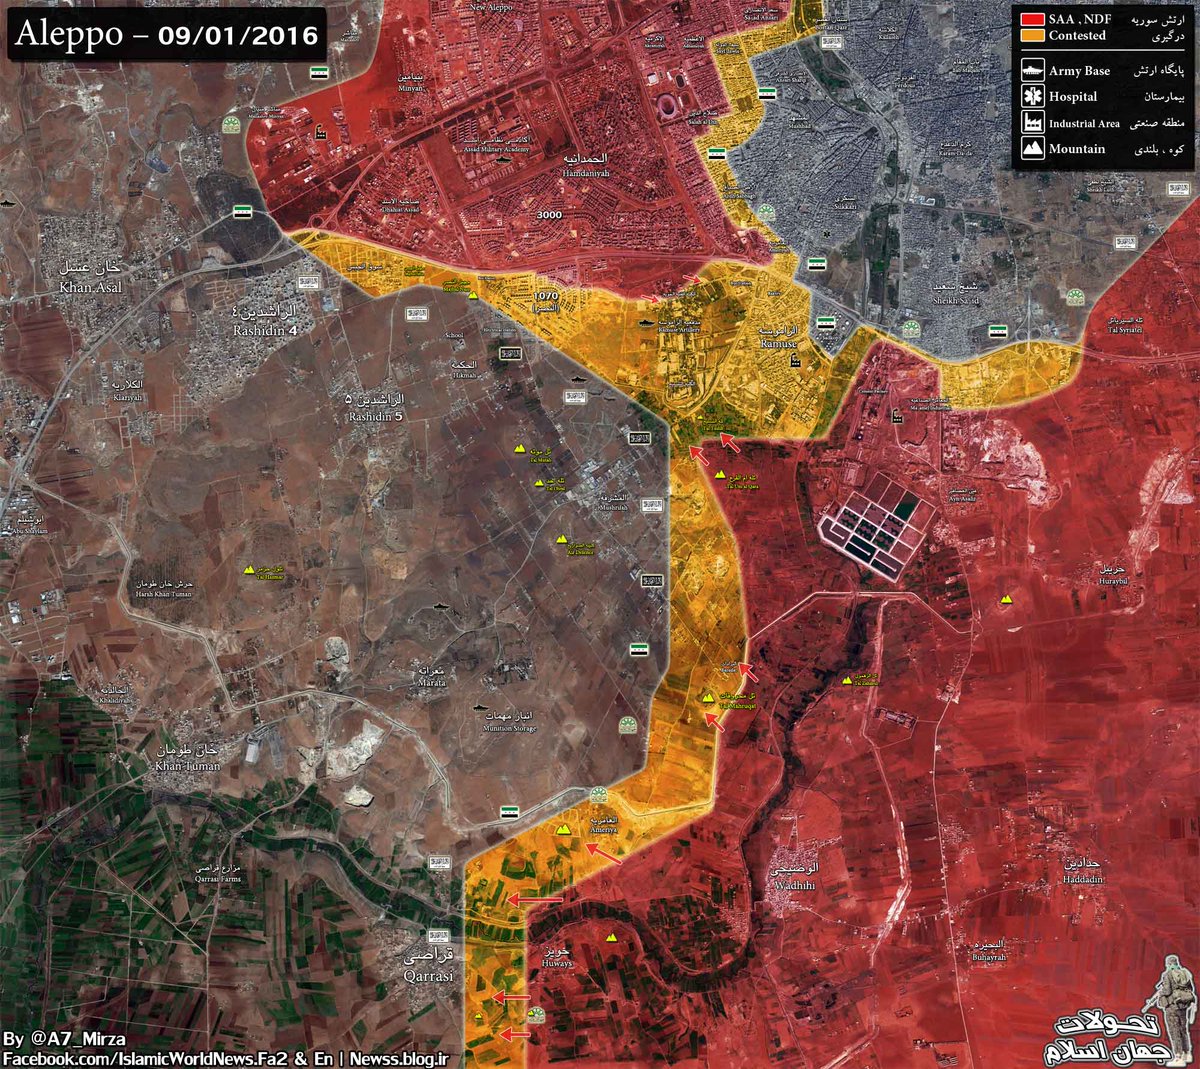 Overview of Military Situation in Aleppo City on September 1, 2016